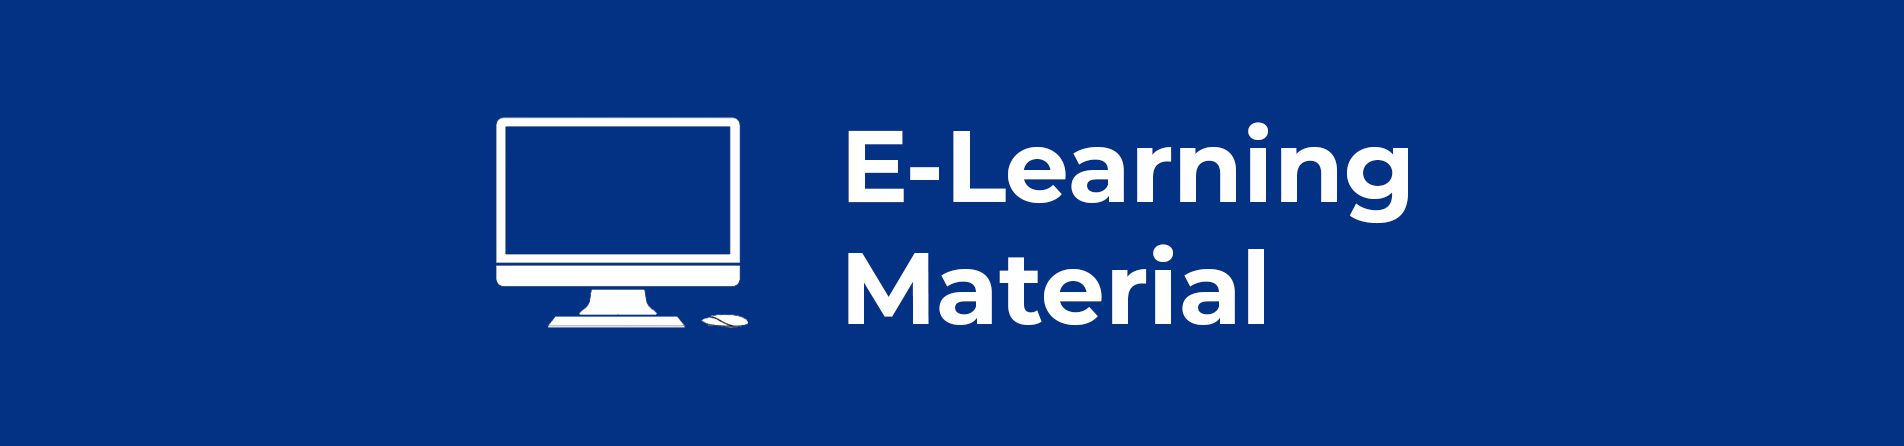 e-learning-material